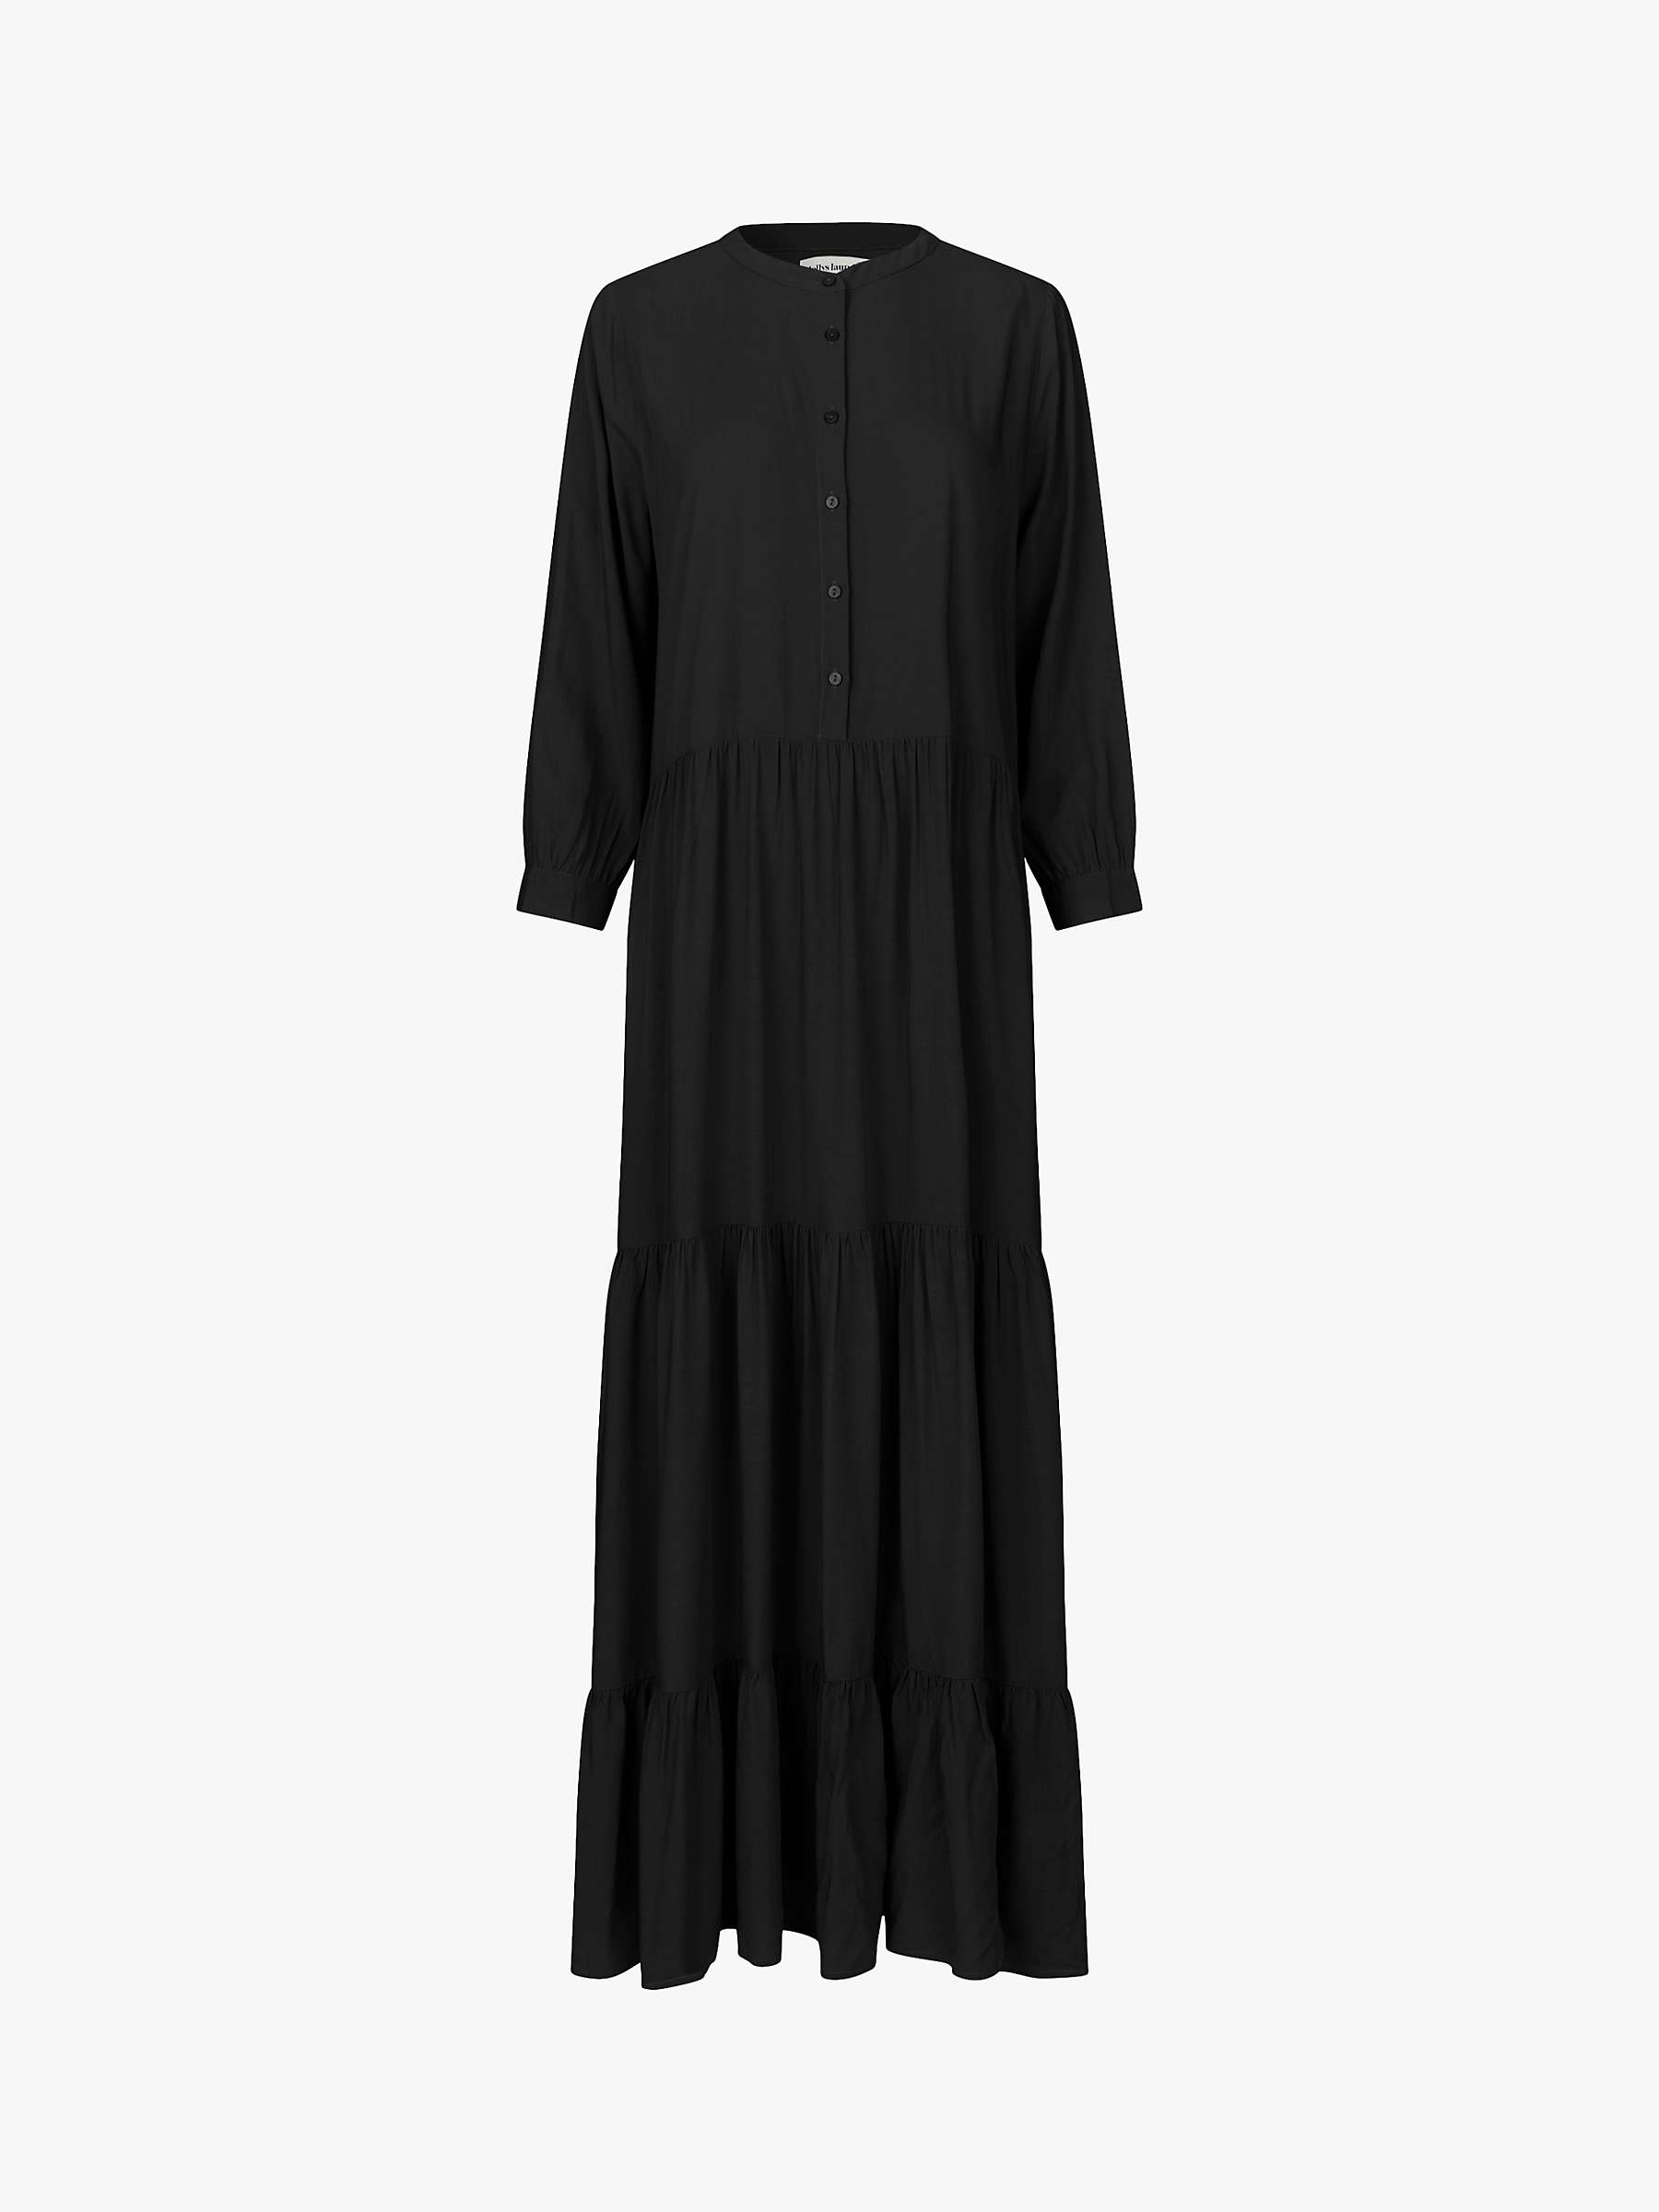 Buy Lollys Laundry Nee Tiered Maxi Dress, Black Online at johnlewis.com